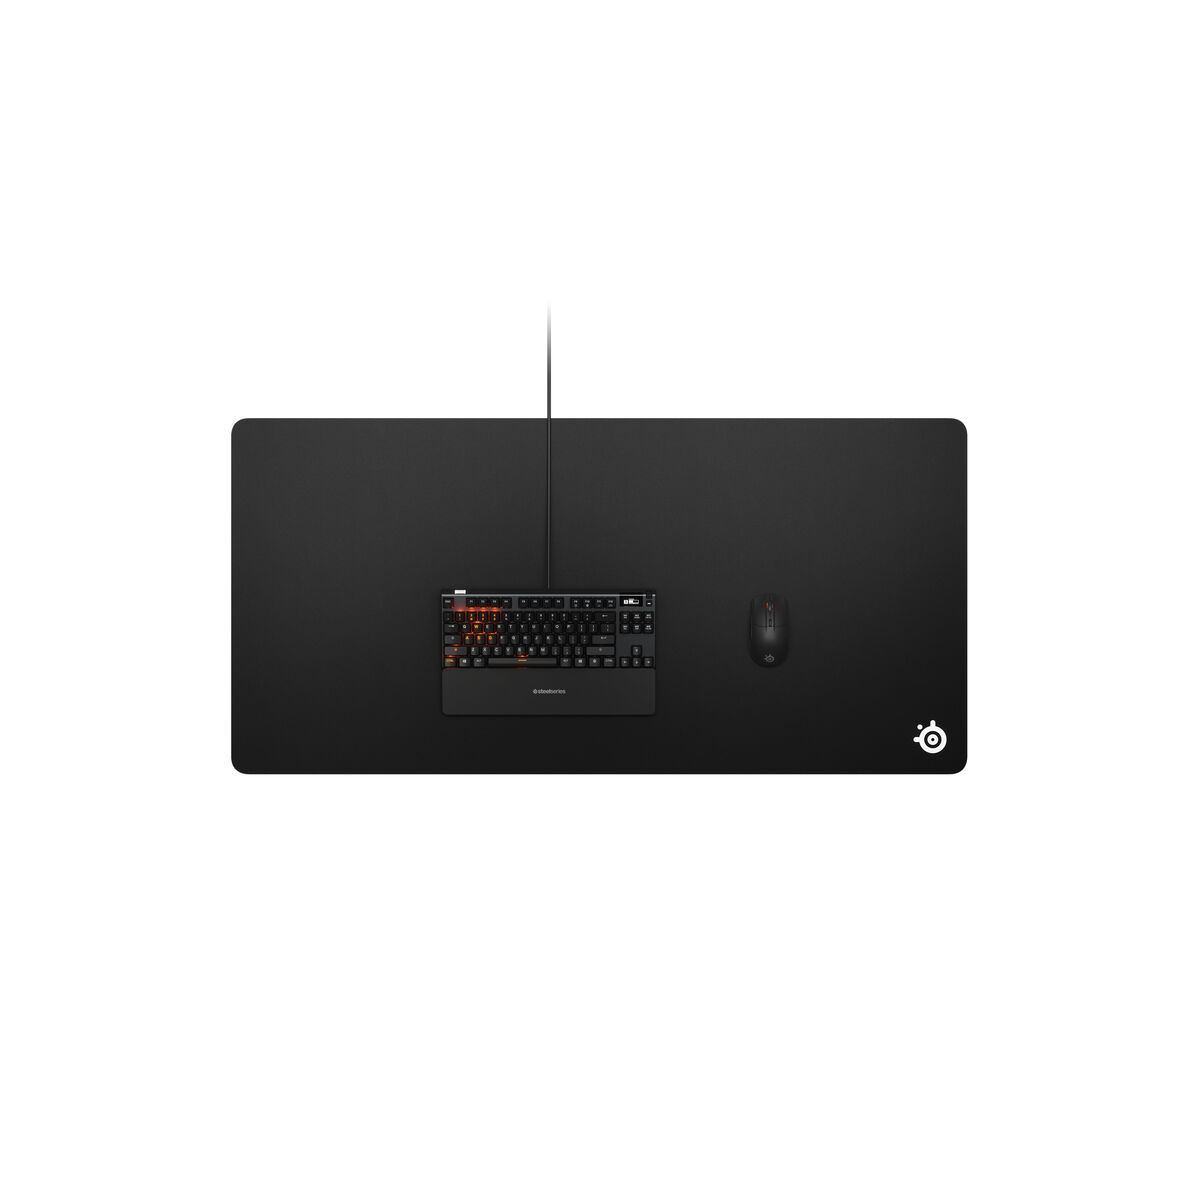 Mouse mat SteelSeries QcK 3XL 59 x 122 cm Black Gaming